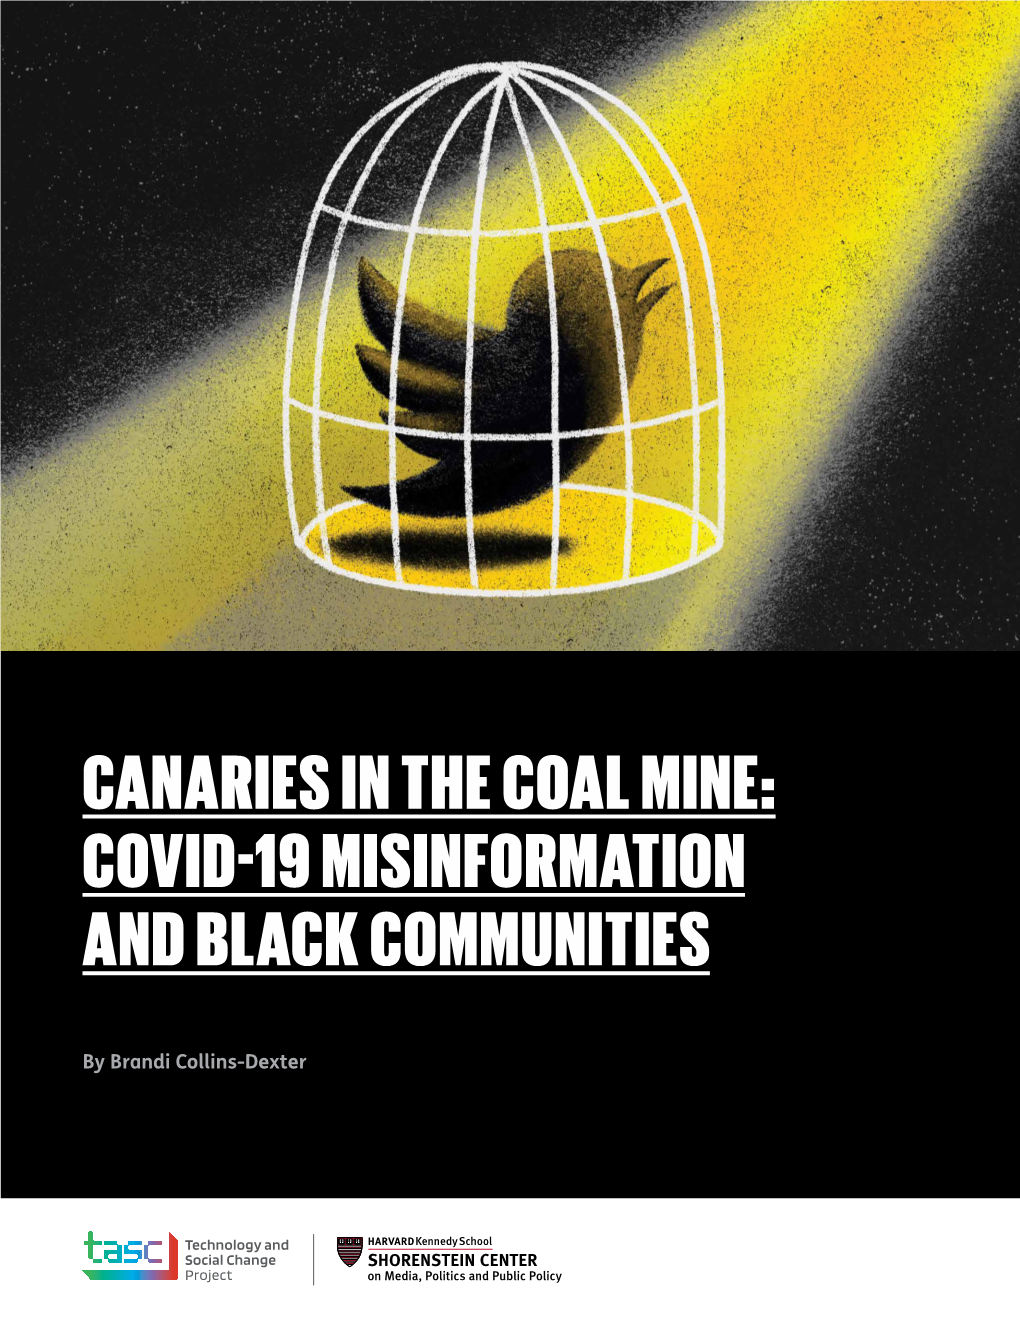 Canaries in the Coal Mine: Covid-19 Misinformation and Black Communities